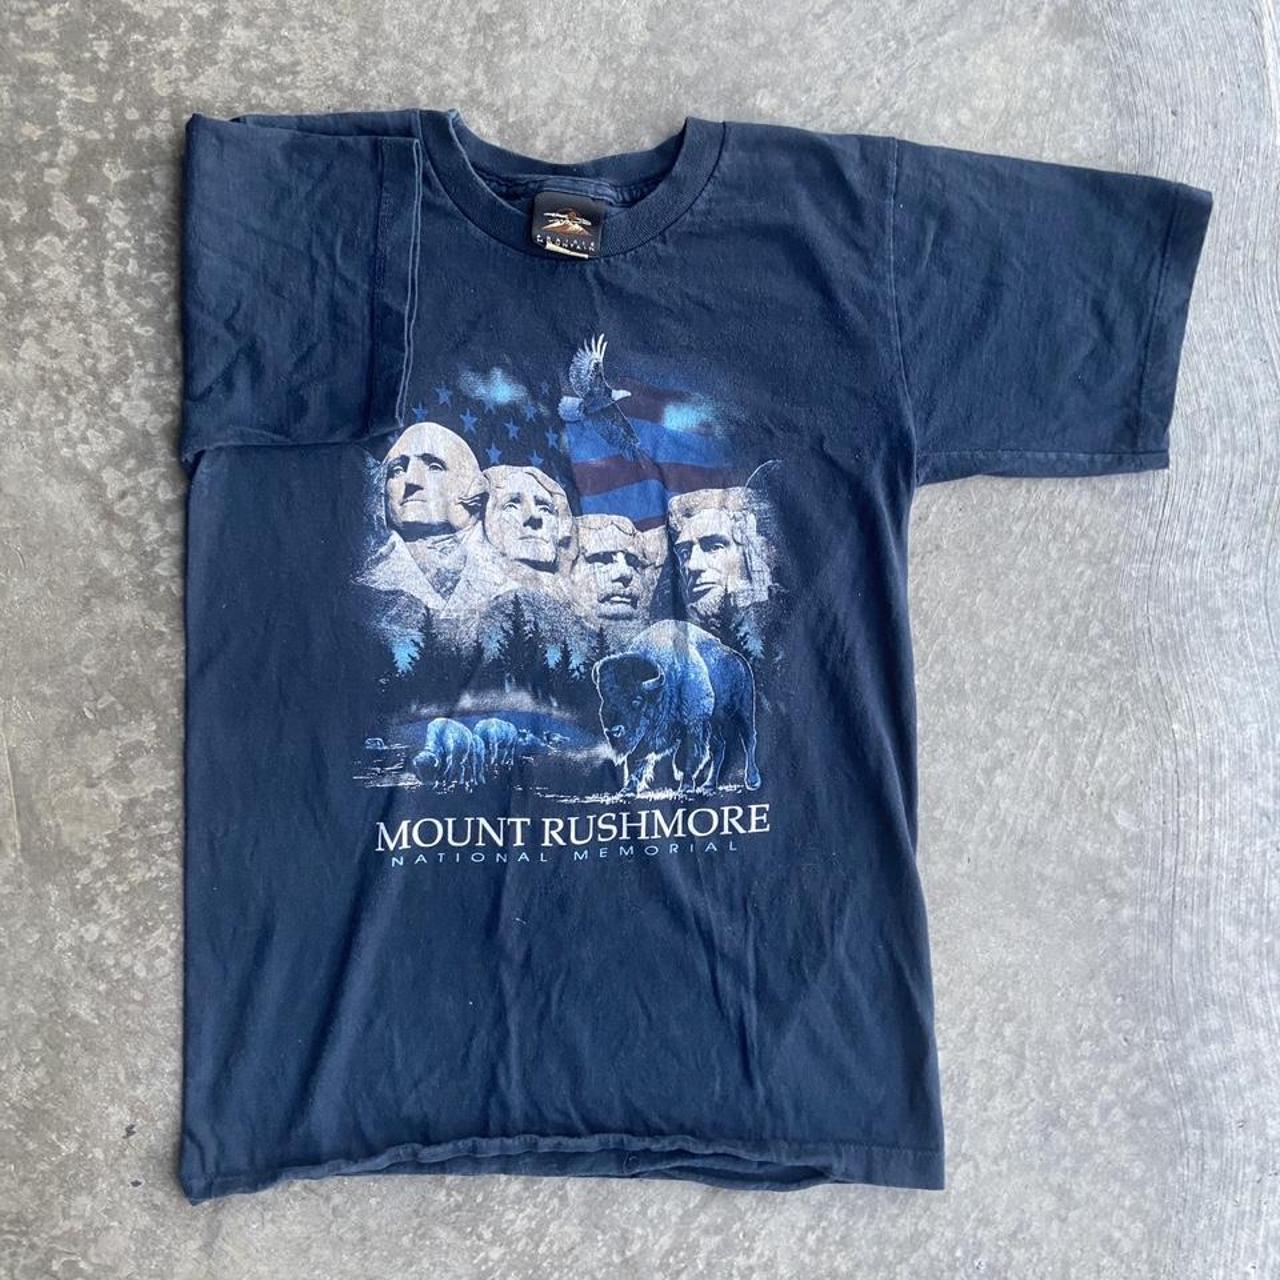 Product Image 2 - Praire Mountain-Mount Rushmore Tee
Excellent condition